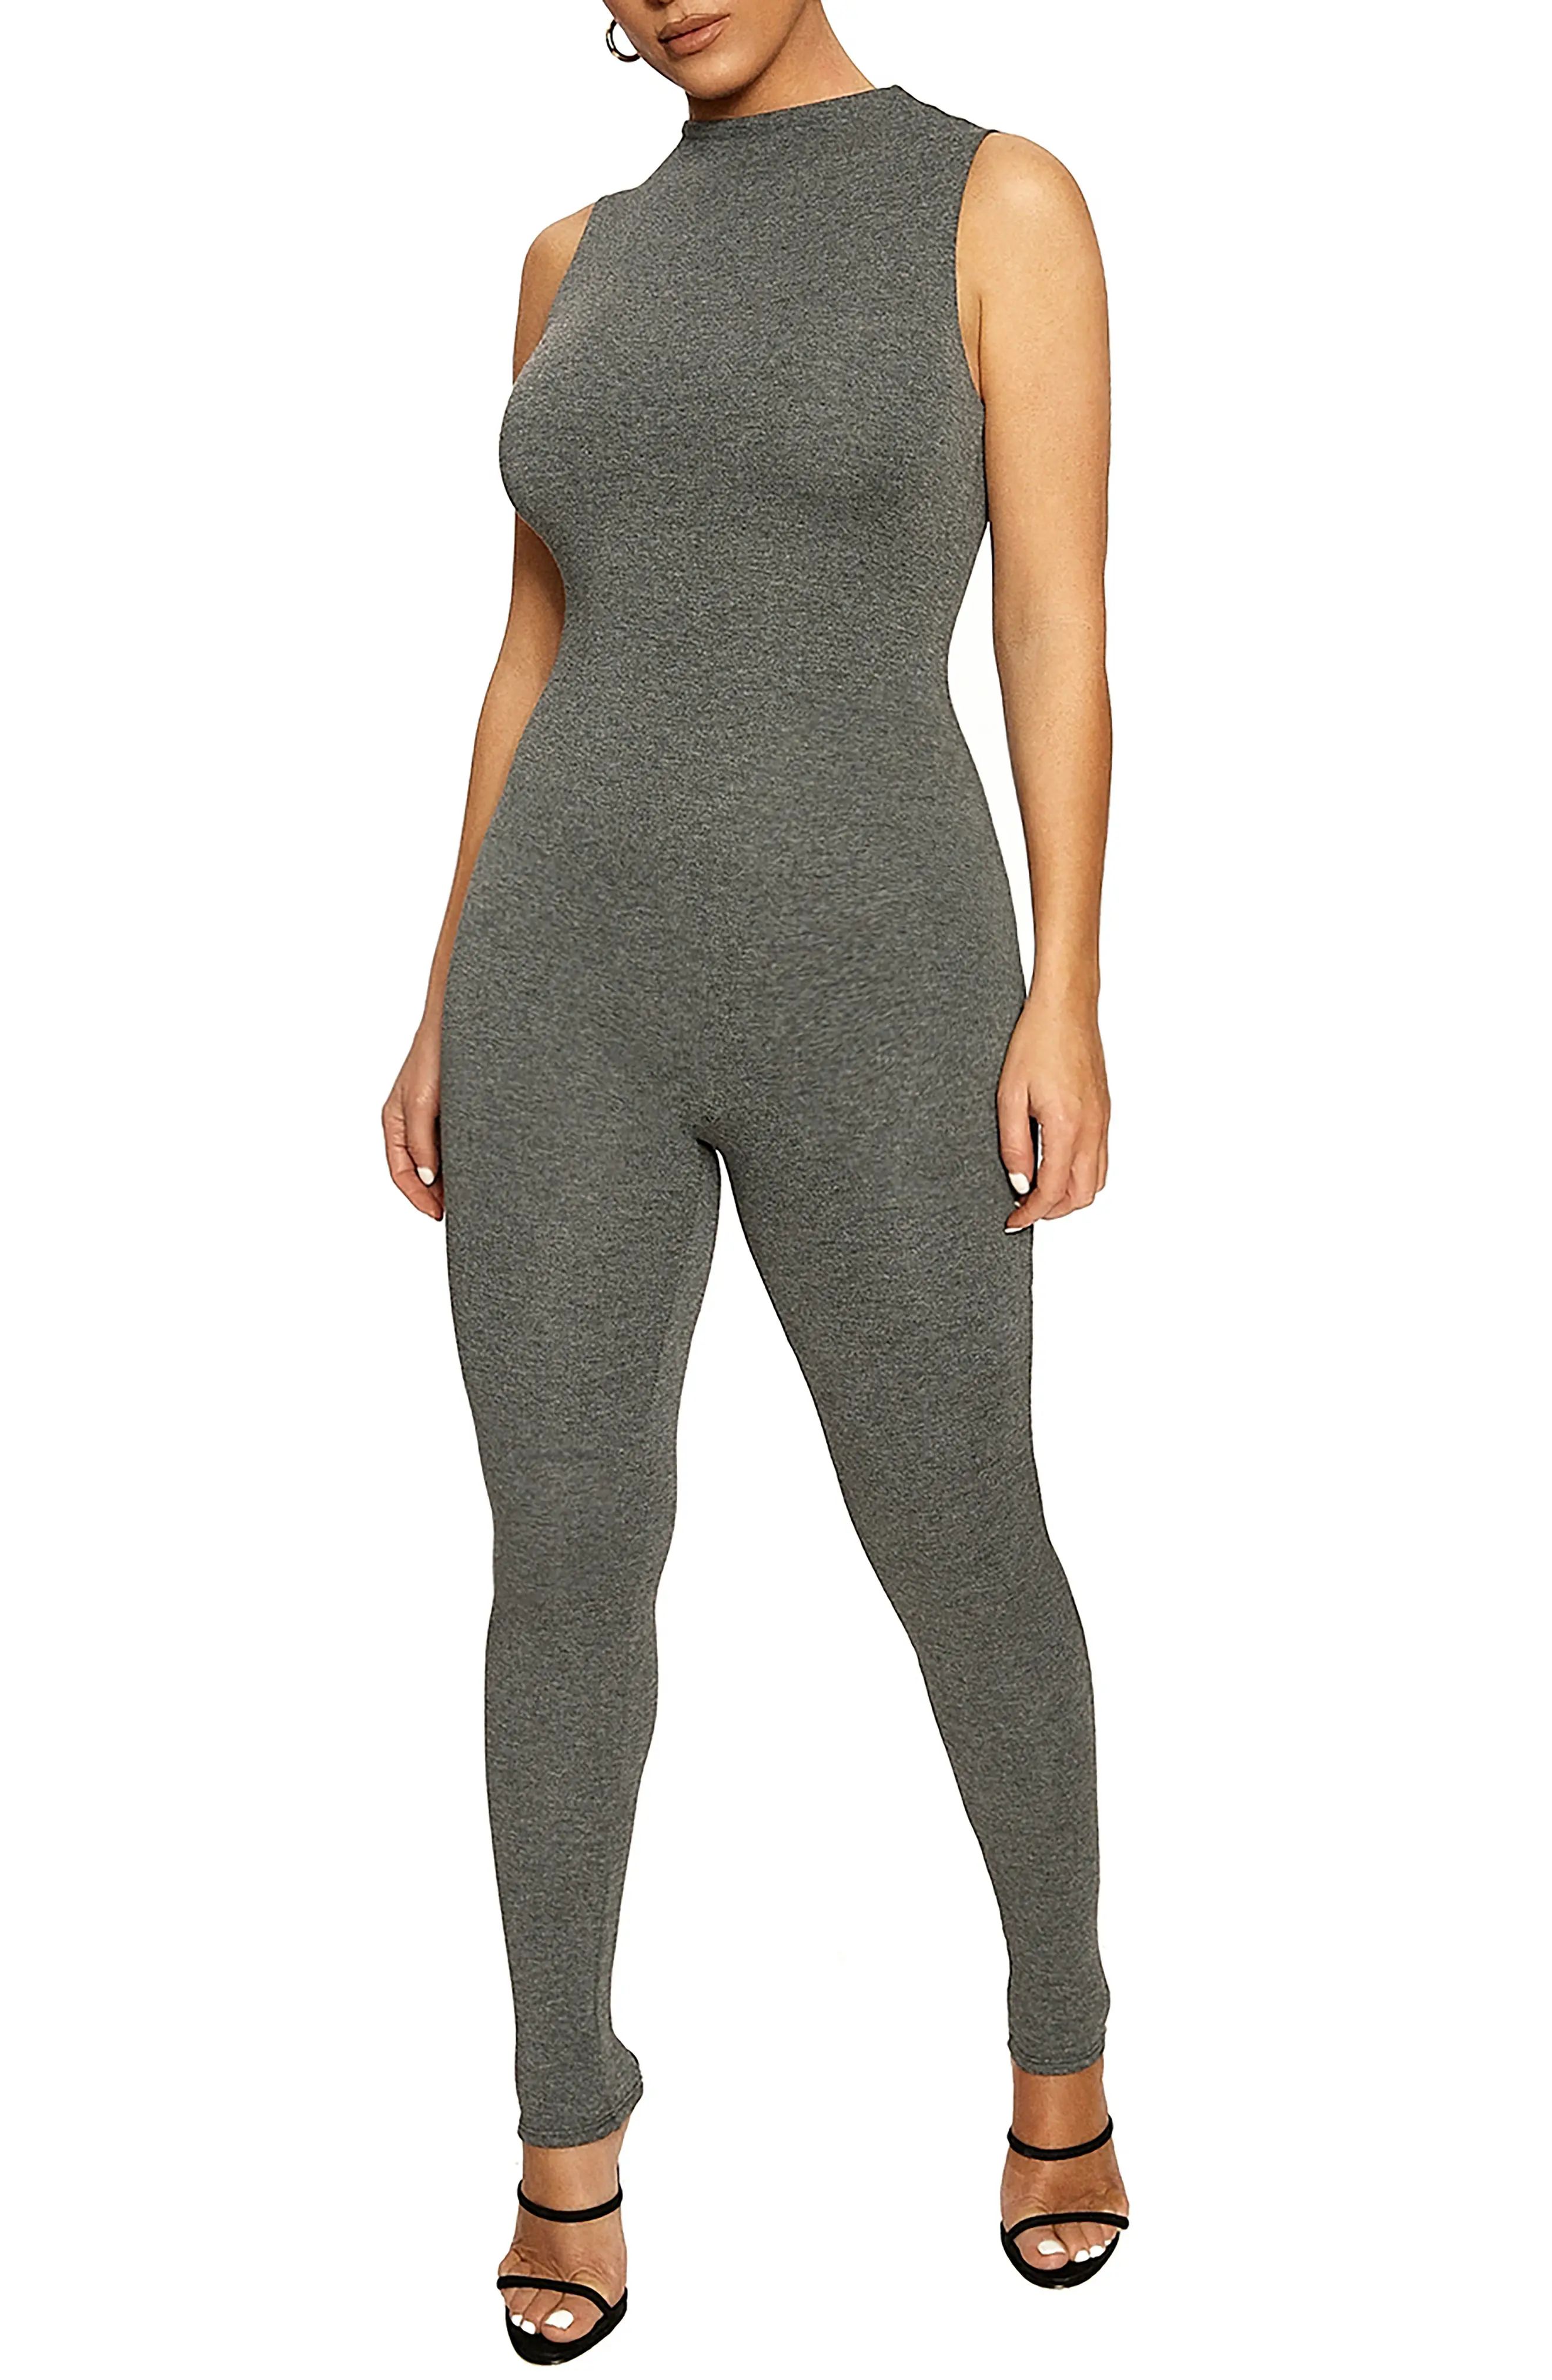 Women's Naked Wardrobe The Nw Sleeveless Jumpsuit, Size Small - Grey | Nordstrom